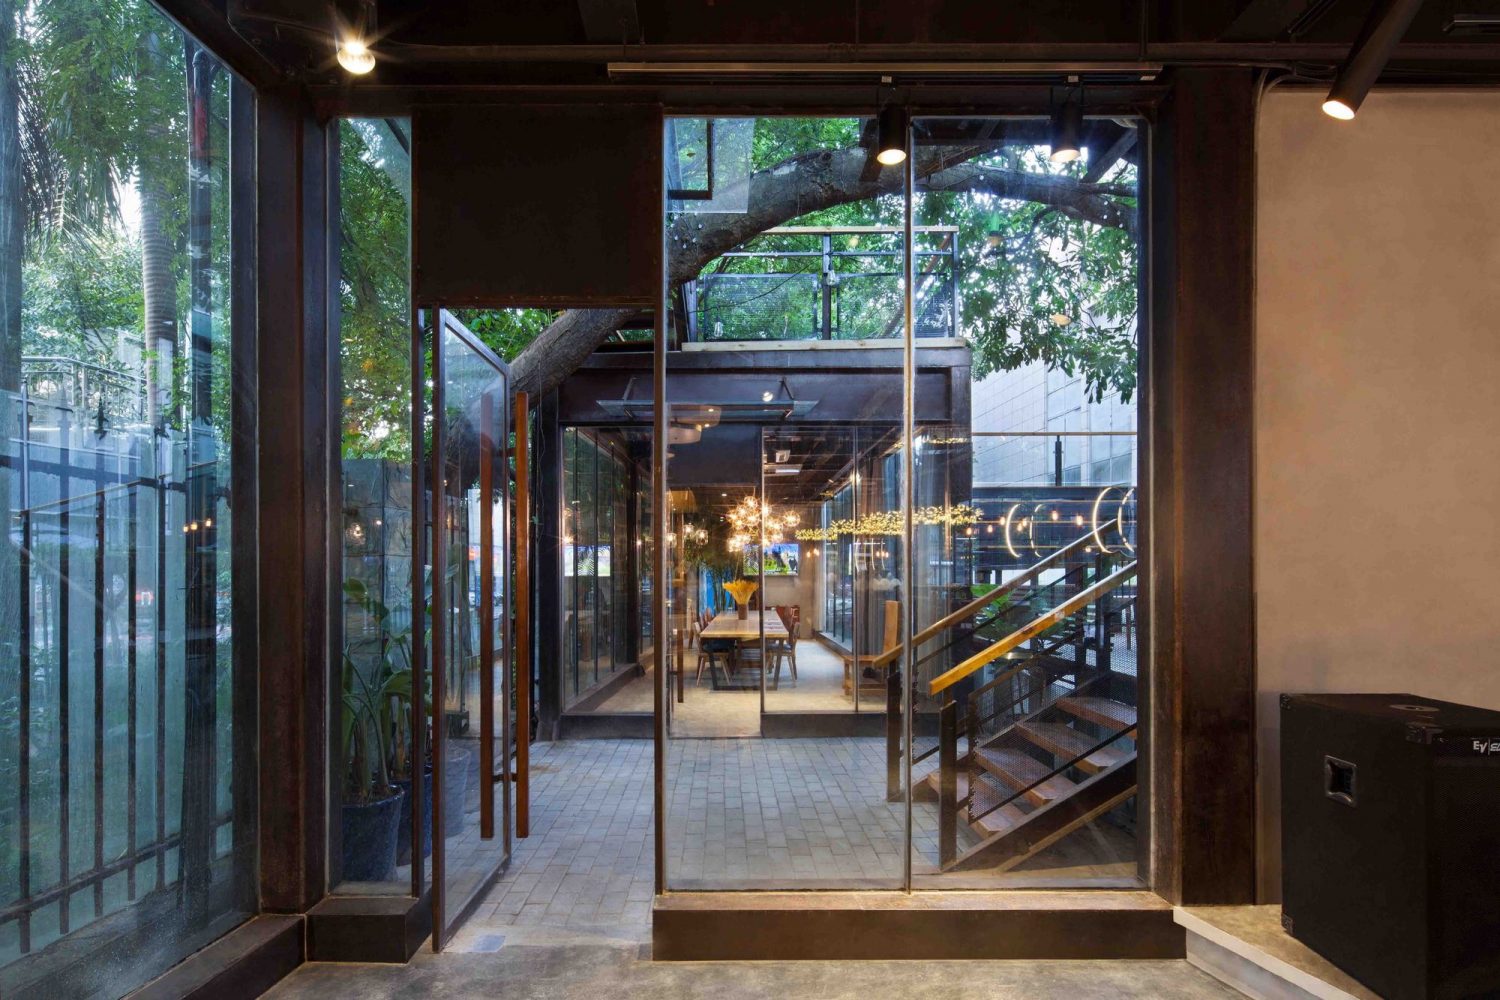 Shenzhen Maoshuli Cafe by Elsedesign